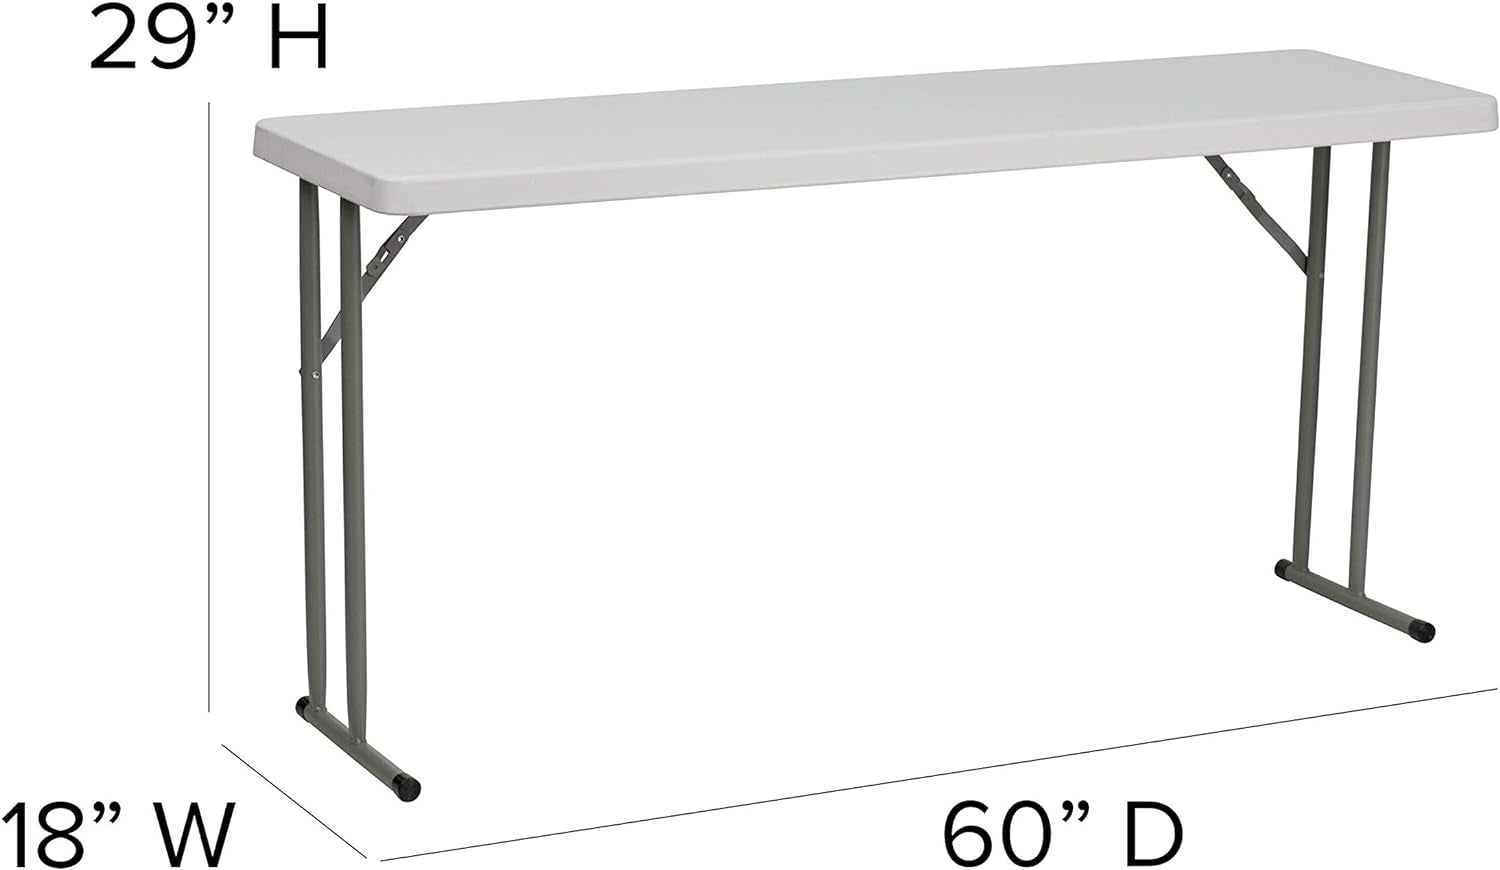 Kathryn 5' Plastic Folding Training and Event Table, Rectangular Folding Training Table with 330-Lb. Static Weight Capacity, White